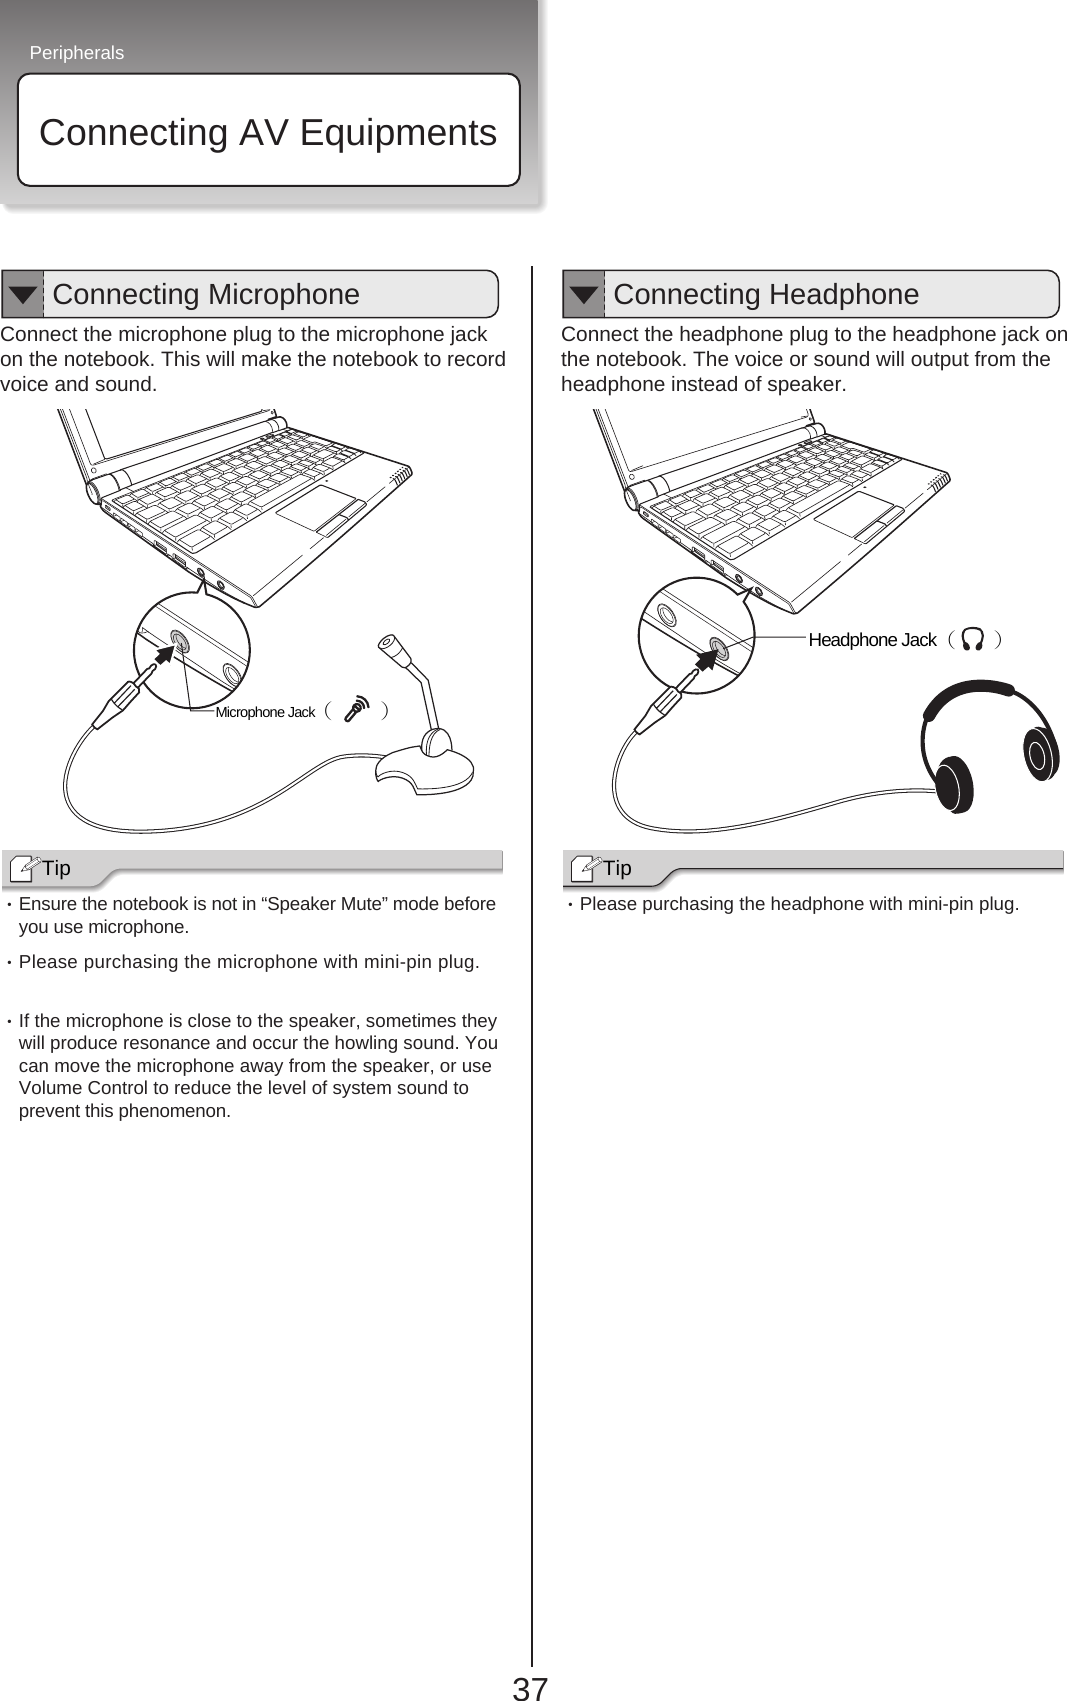 Peripherals37Connecting AV Equipments・Ensure the notebook is not in “Speaker Mute” mode beforeyou use microphone.・Please purchasing the microphone with mini-pin plug.・If the microphone is close to the speaker, sometimes theywill produce resonance and occur the howling sound. Youcan move the microphone away from the speaker, or useVolume Control to reduce the level of system sound to prevent this phenomenon.Connect the headphone plug to the headphone jack onthe notebook. The voice or sound will output from theheadphone instead of speaker.・Please purchasing the headphone with mini-pin plug.Connect the microphone plug to the microphone jackon the notebook. This will make the notebook to recordvoice and sound.Tip Headphone Jack（ 　） Tip Microphone Jack（ 　 ） Connecting Microphone Connecting Headphone